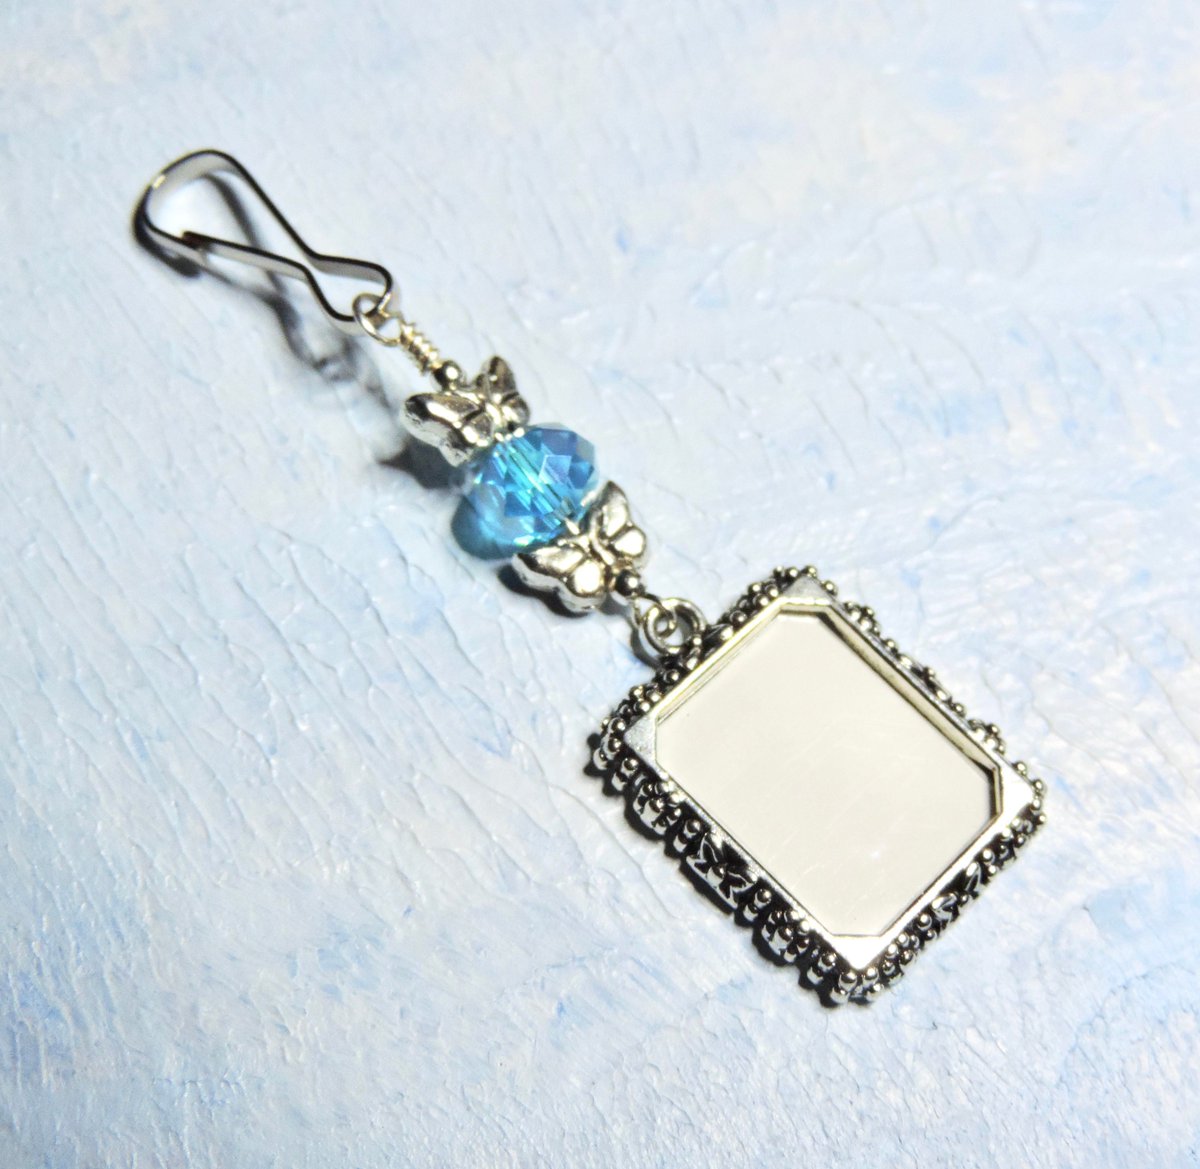 Excited to share this lovely butterflies memorial charm with Aqua crystal.  etsy.me/3QMd4rD @Etsy #Etsy #etsyseller #etsyshop #epiconetsy #shopsmall #promomyshop #etsymntt #etsychaching #butterflies #memento #gifts